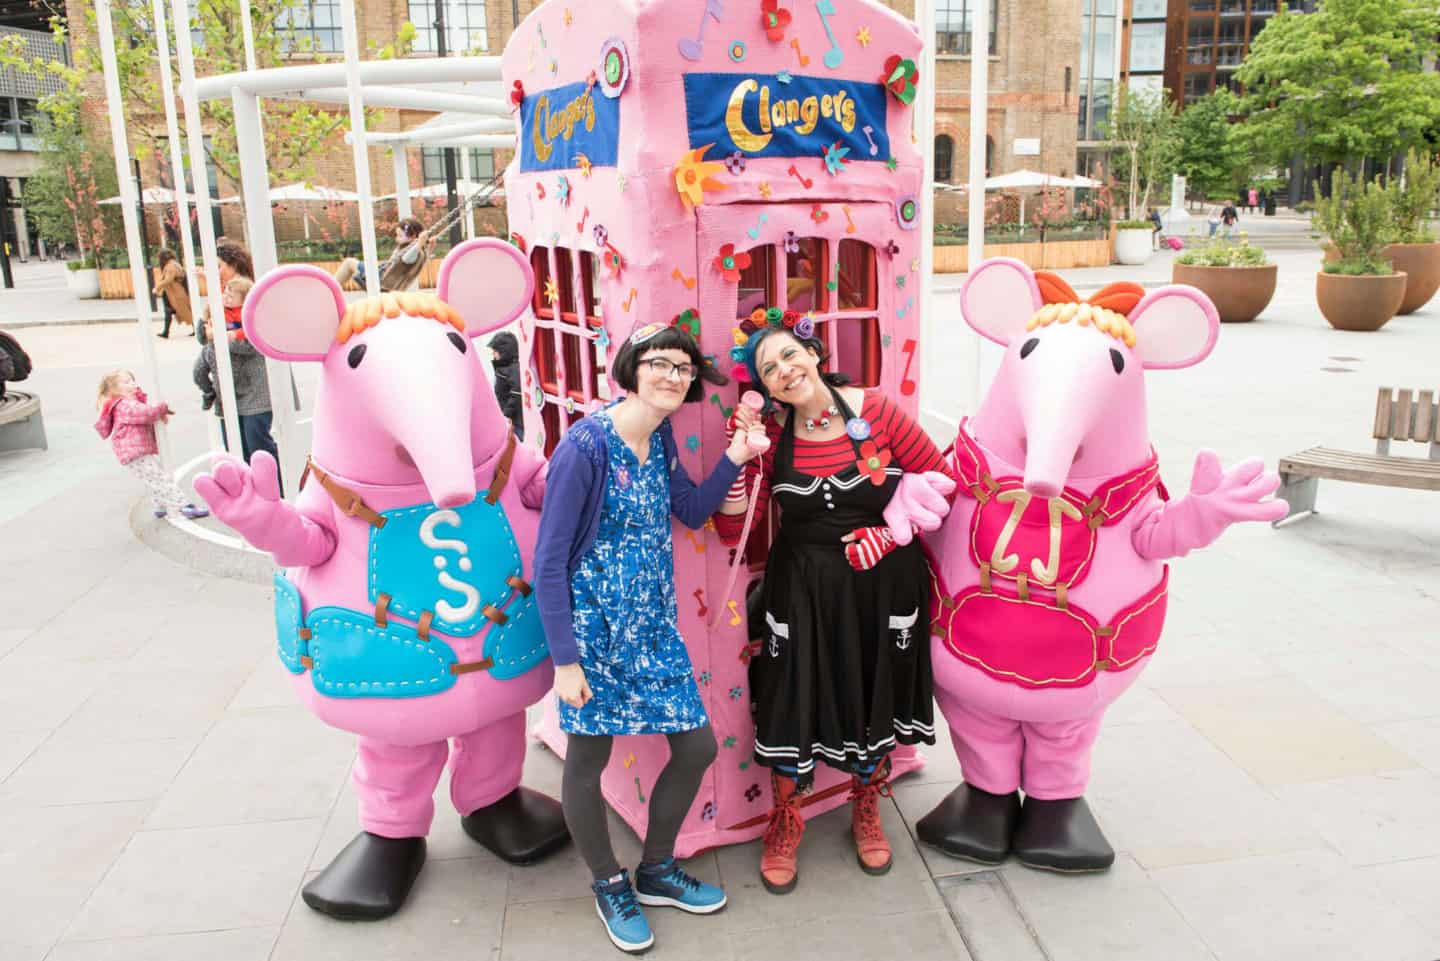 Call the Clangers at King's Cross 7